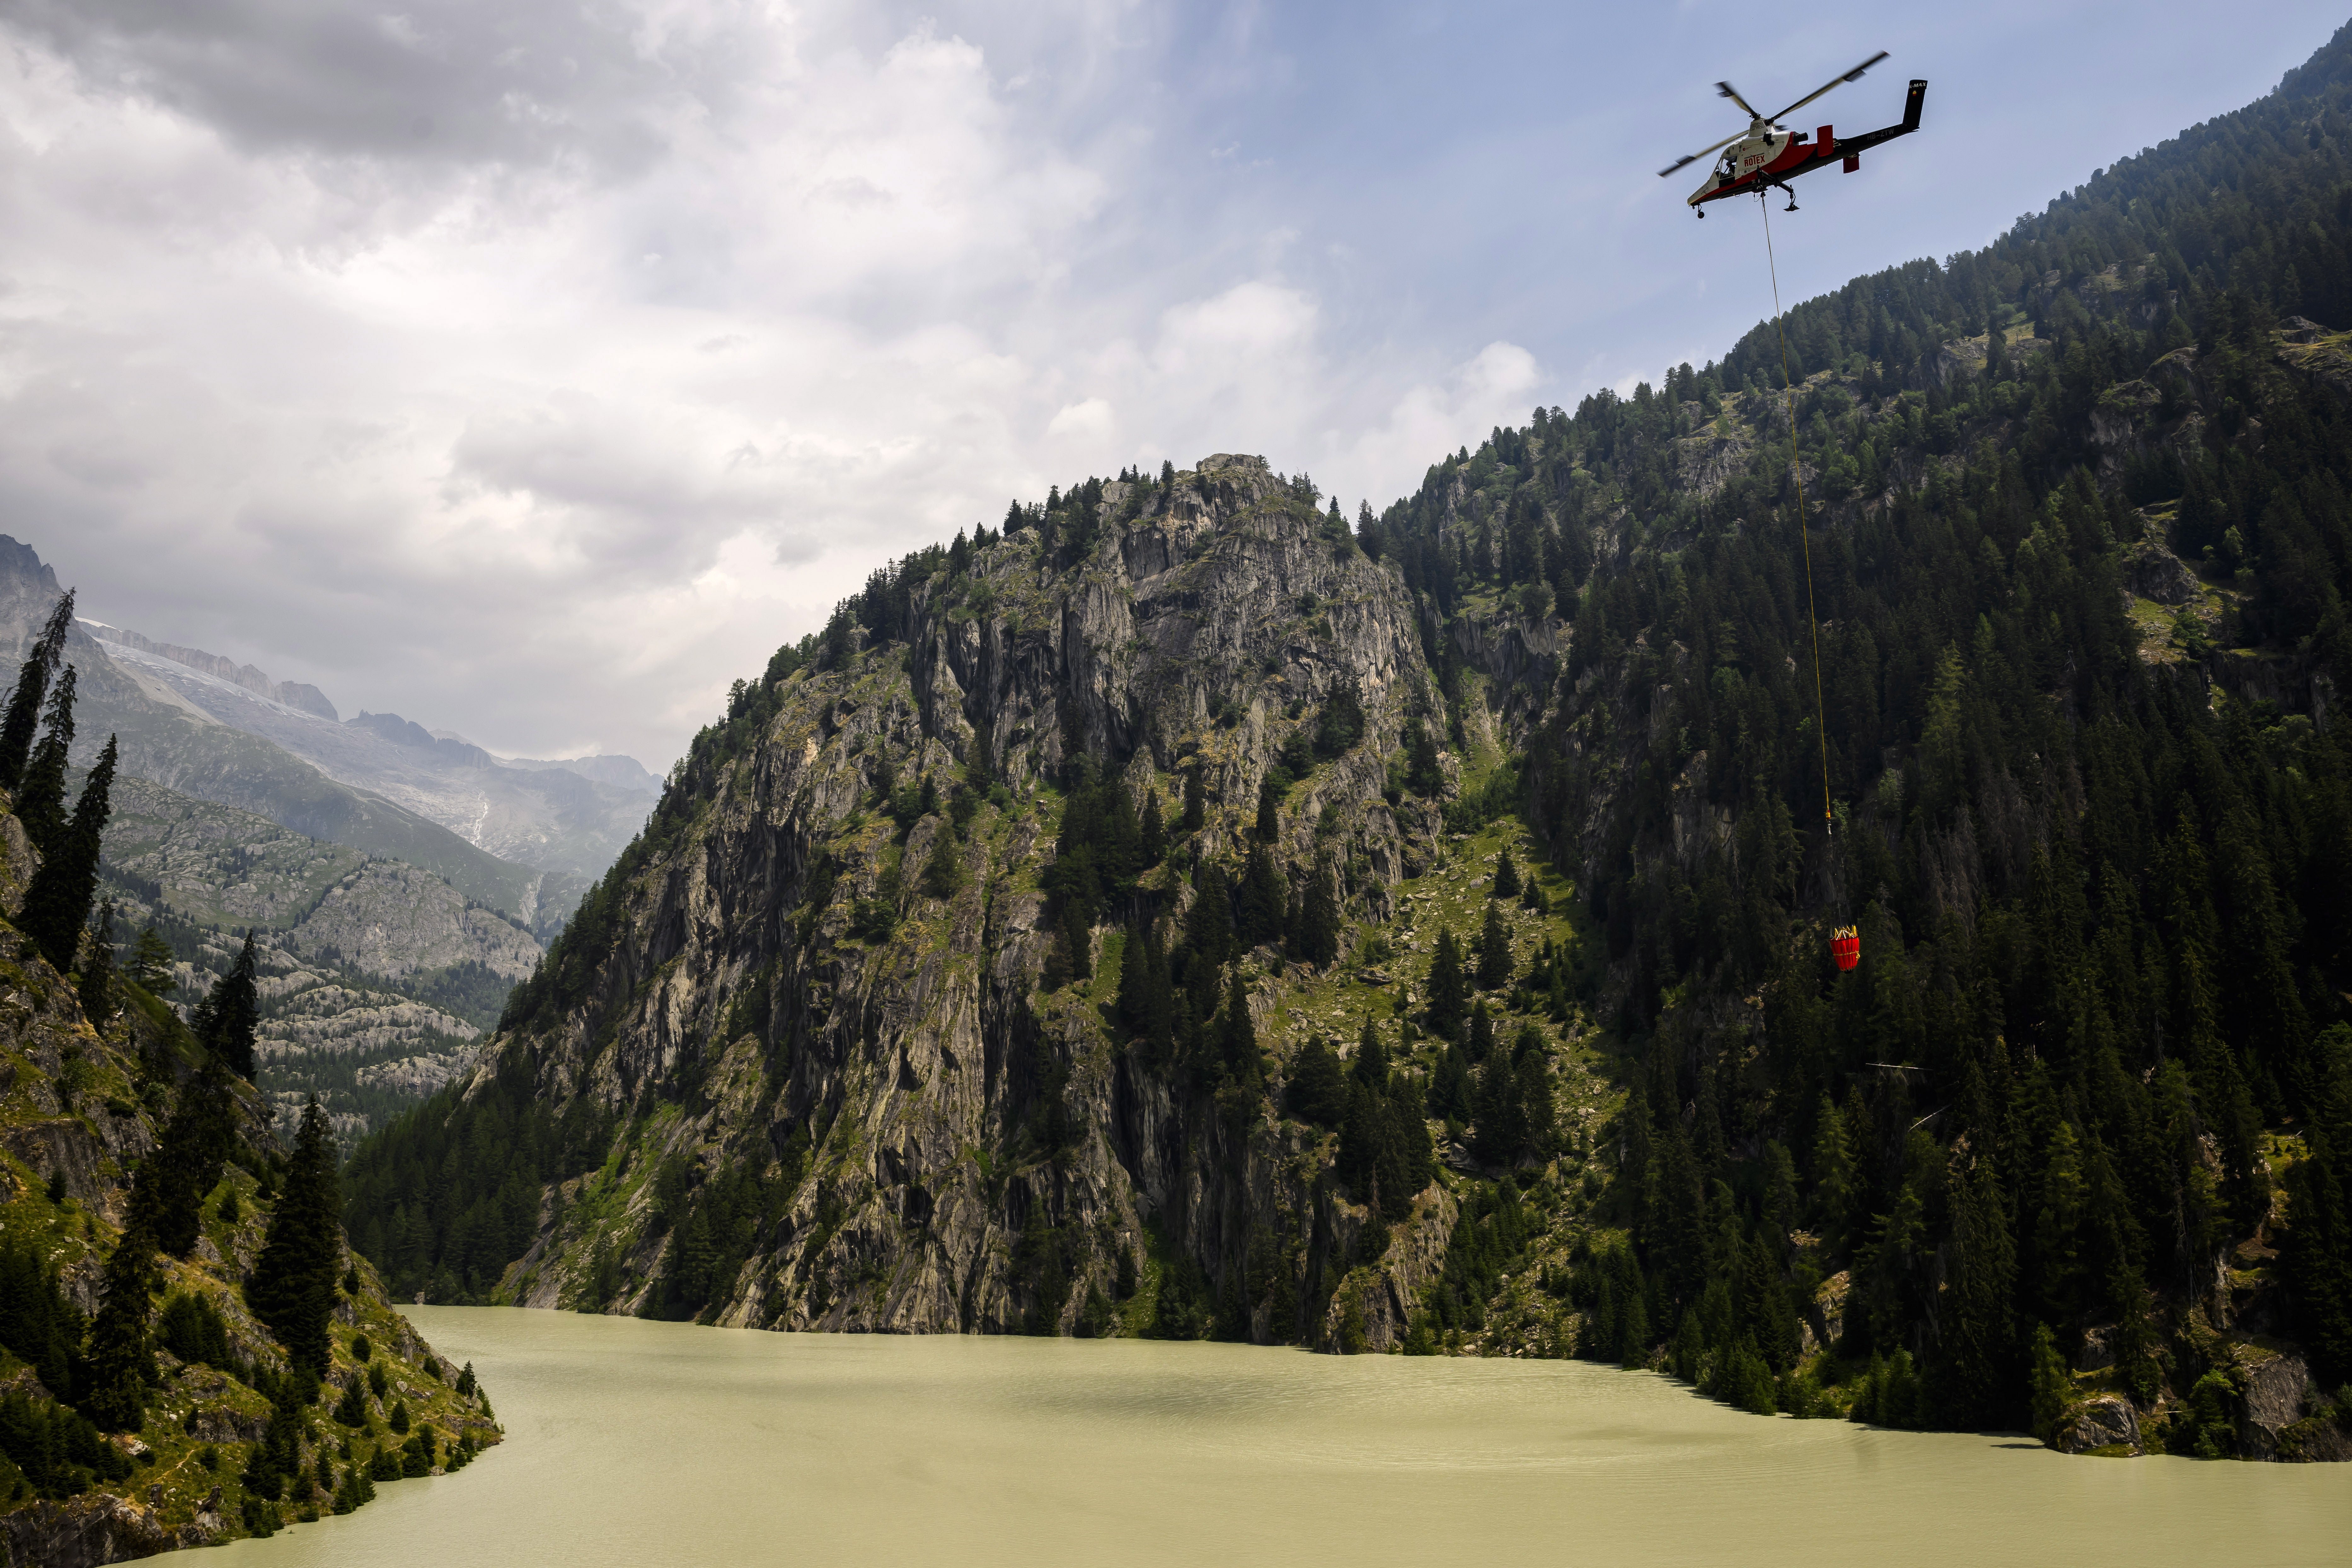 A helicopter refills its bucket over the Gibidum dam to extinguish the forest fire above the Switzerland communes of Bitsch and Ried-Moerel